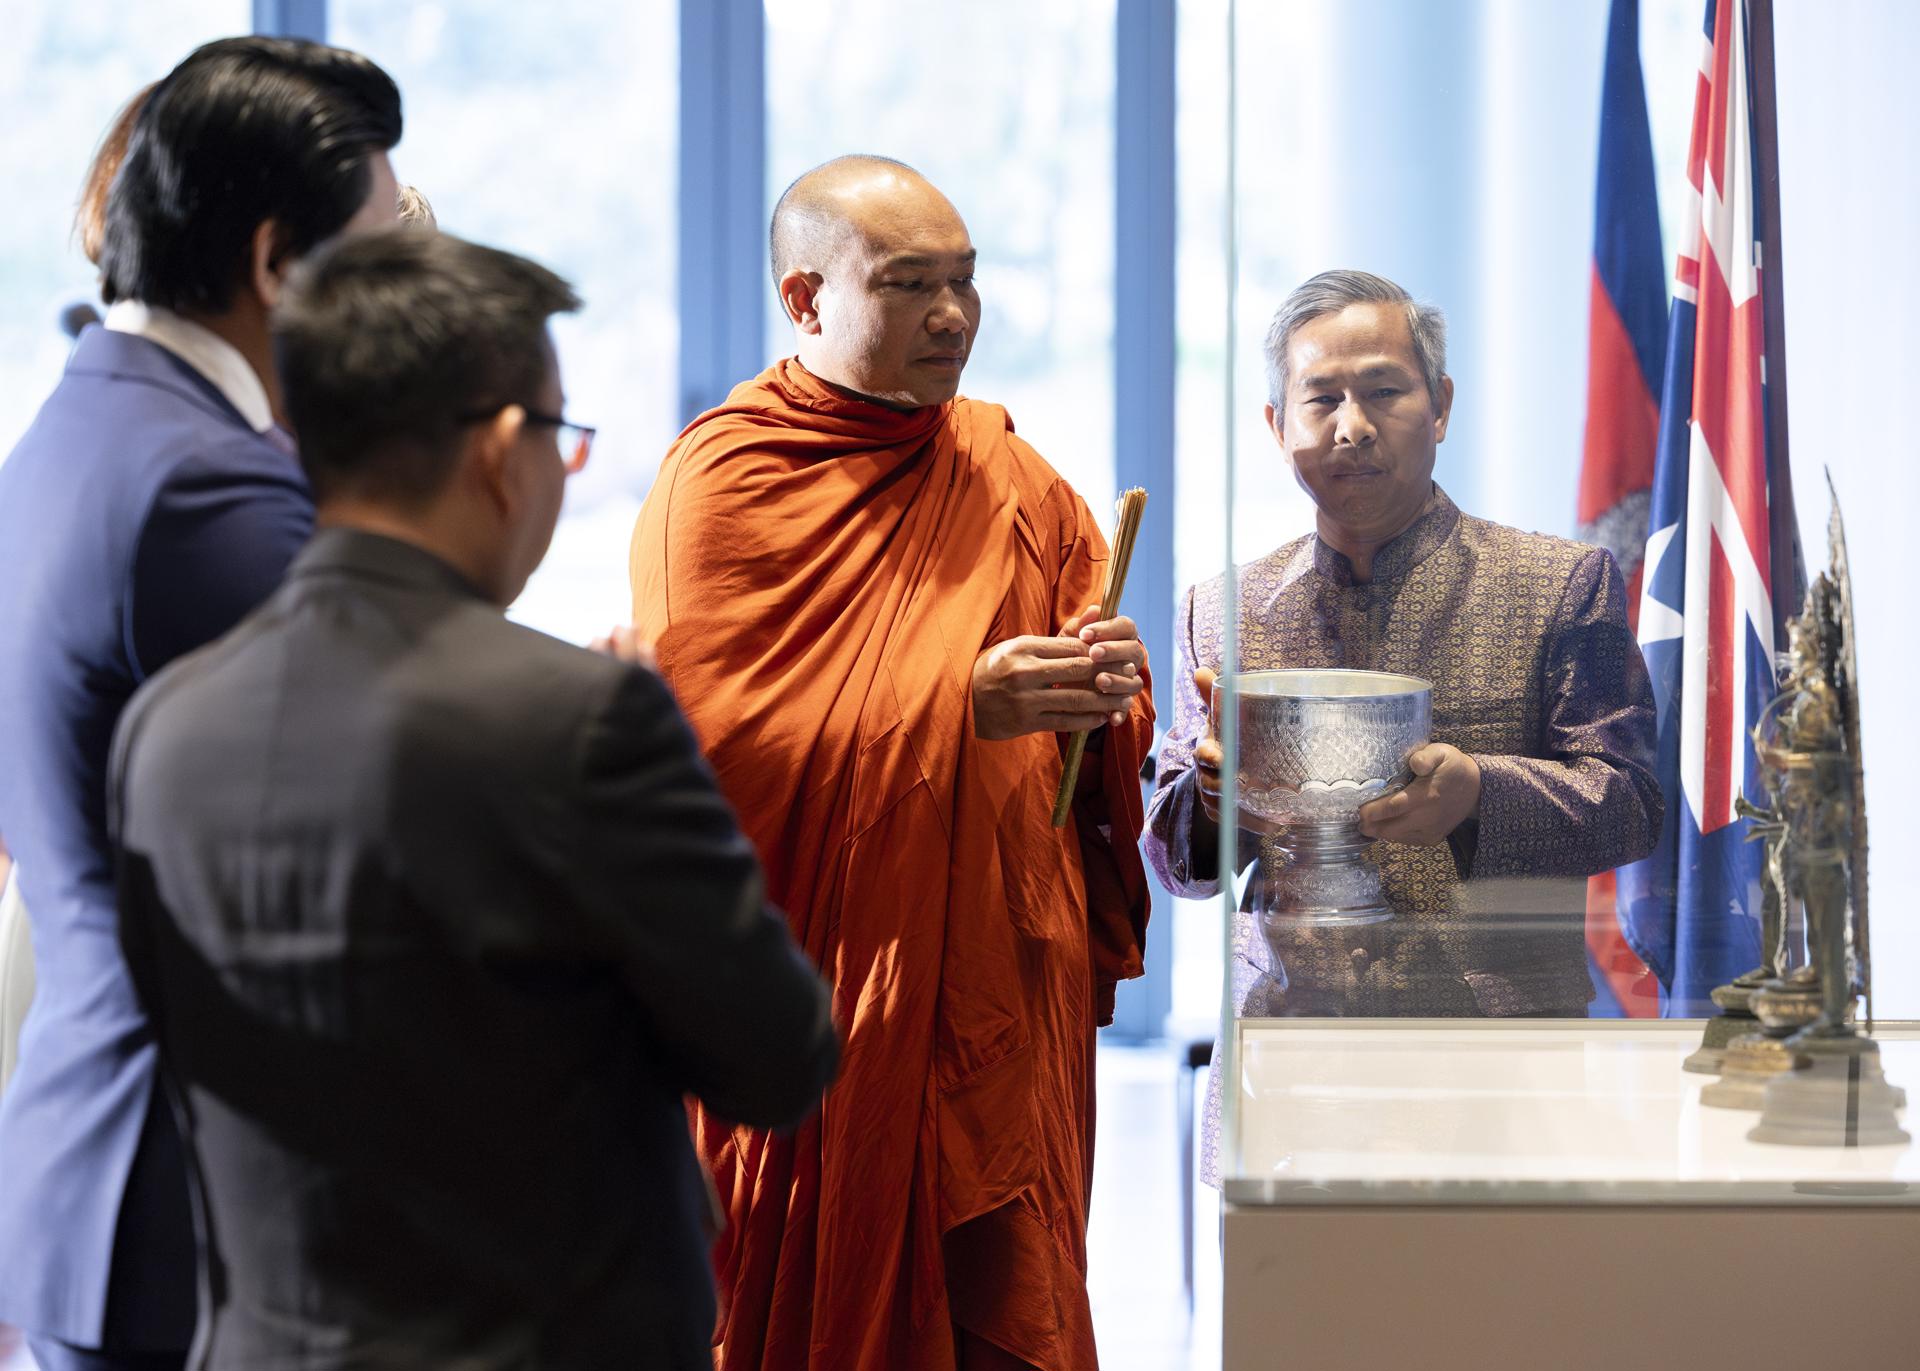 An undated handout photo shows a ceremonial Buddhist blessing by the Venerable Phin Sokol, Abbot of Khemararangsi Buddhist Temple, and Temple Committee Chief Mr Kong Sambok, pictured with Bodhisattva Avalokiteshvara with attendants, at the National Gallery of Australia, Kamberri/Canberra, 2023. EFE/HANDOUT/Karlee Holland/National Gallery of Australia